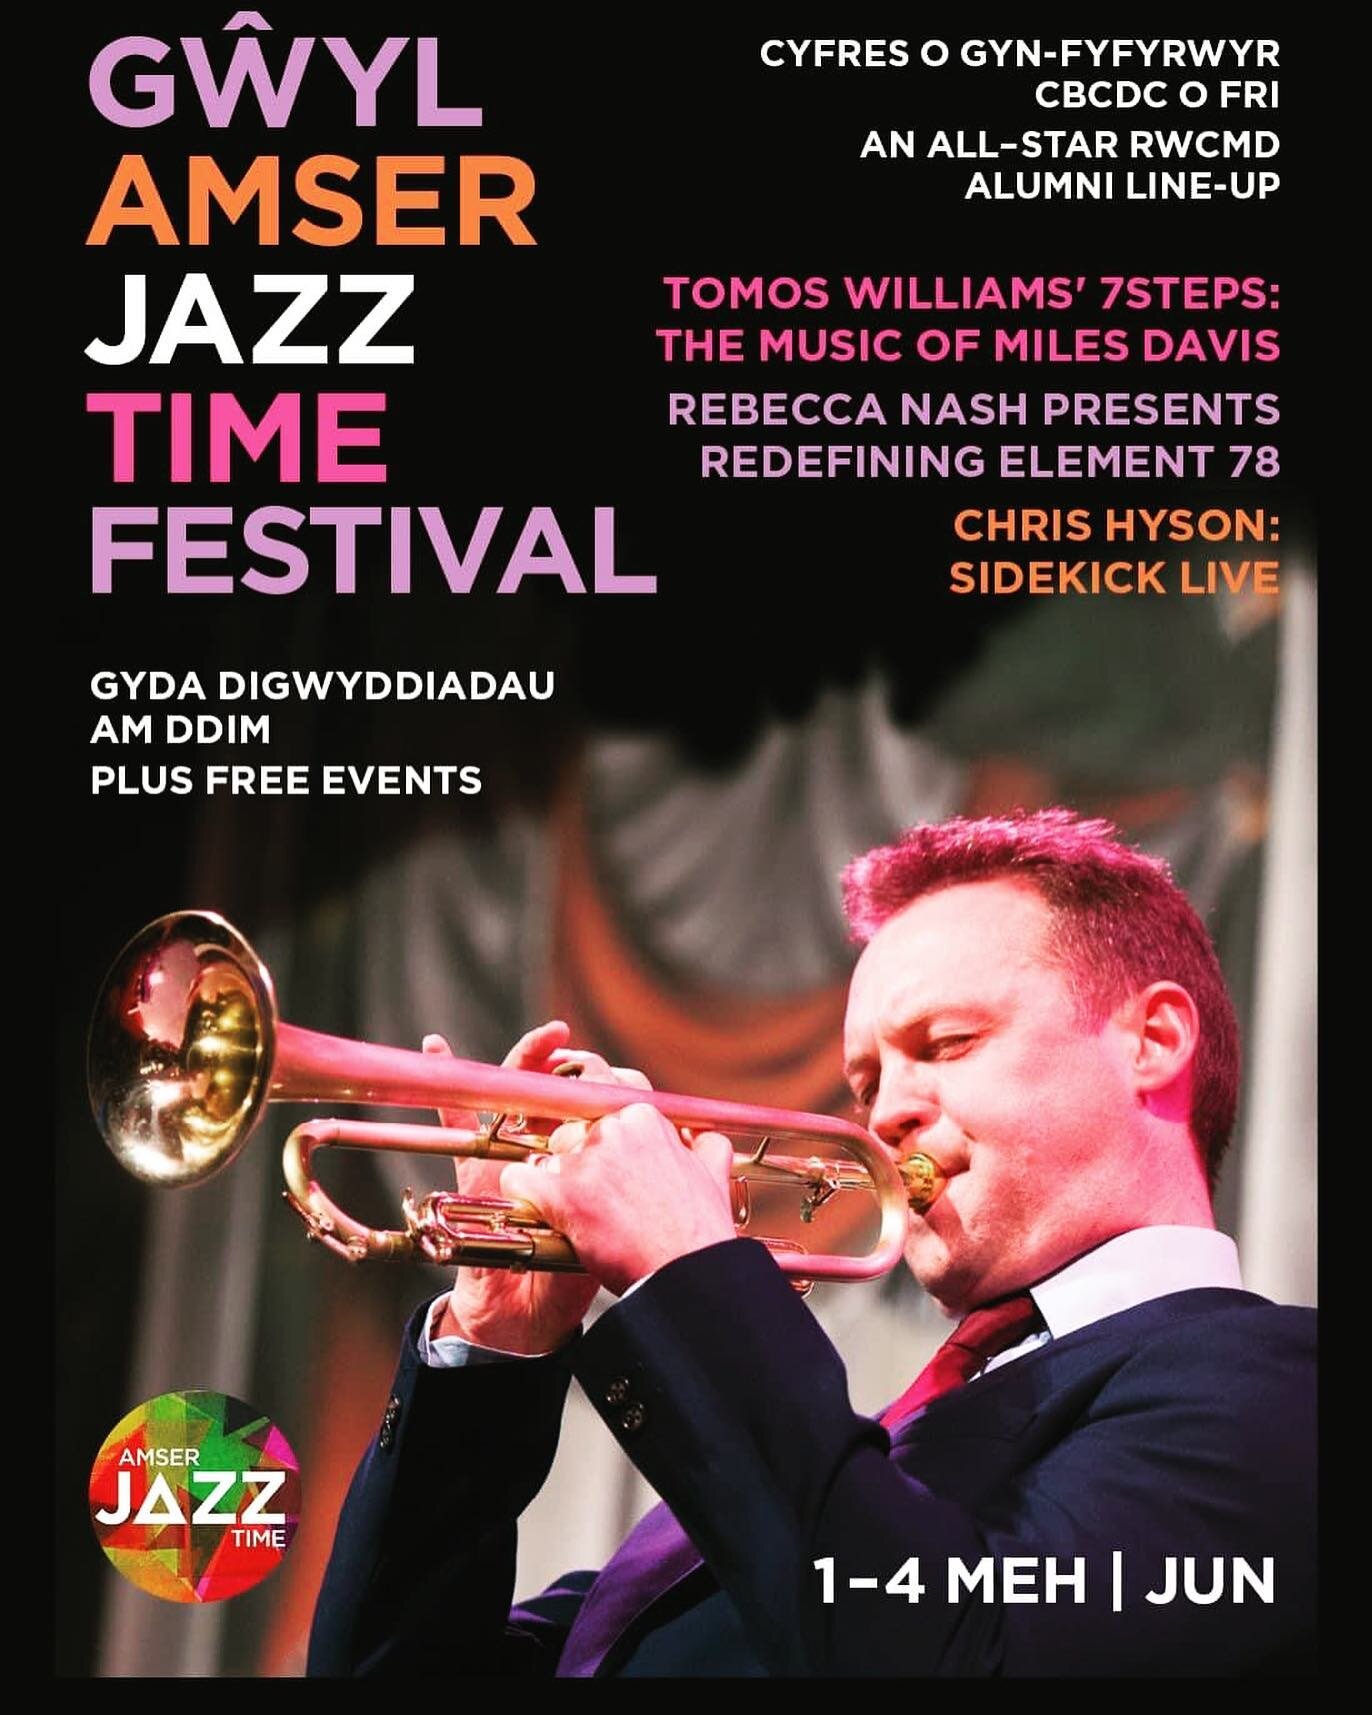 Looking forward to playing a few dates this summer with @tomosww 7Steps: Miles Davis project, beginning with a concert at the @rwcmd as part of the Amserjazztime Festival. 

June 3rd. Get your tickets